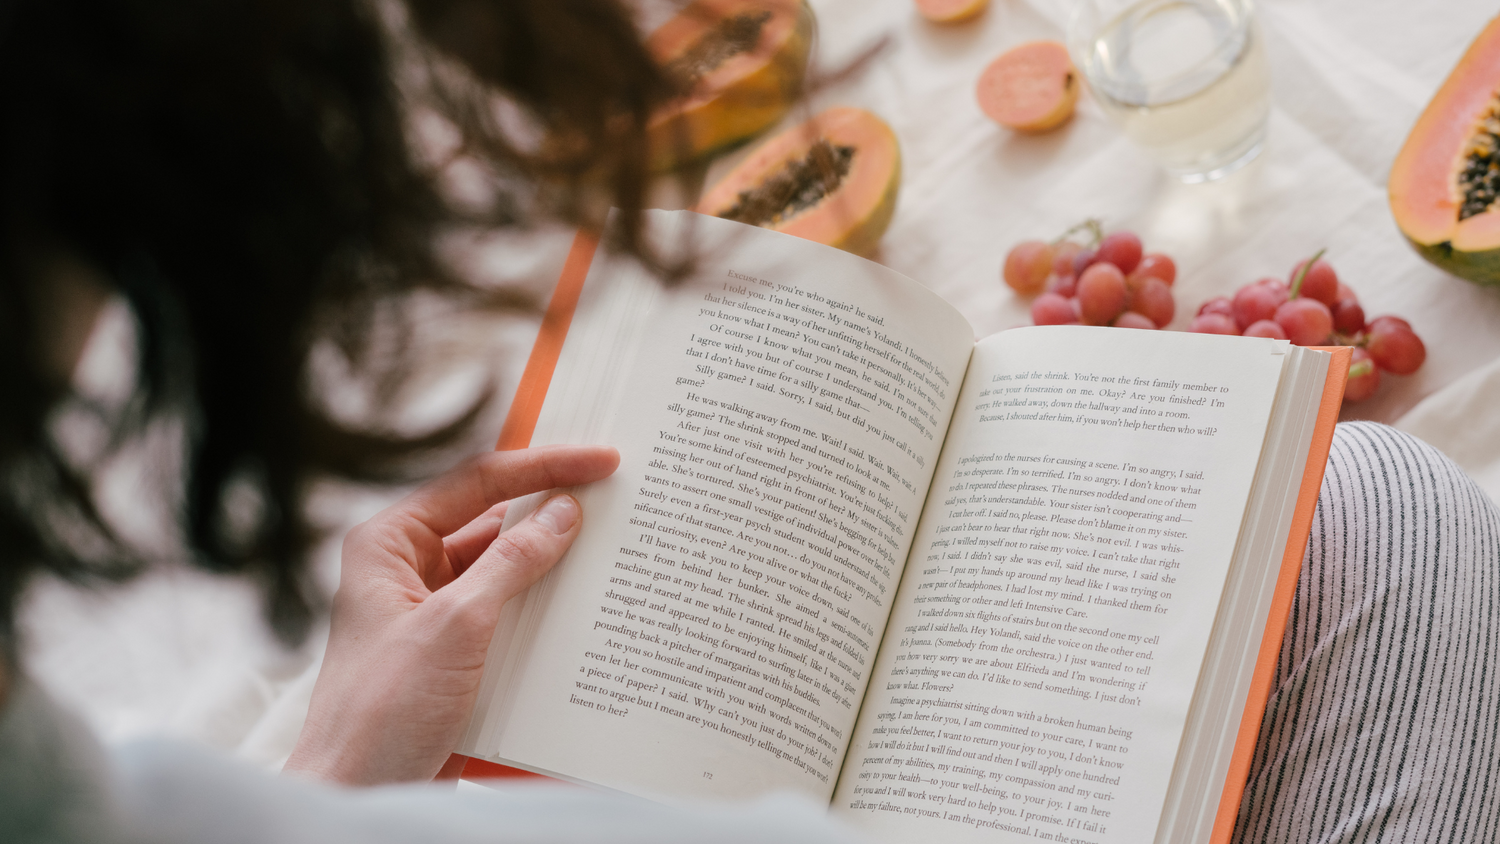 Top 5 Wellness Reads to Transform Your Life